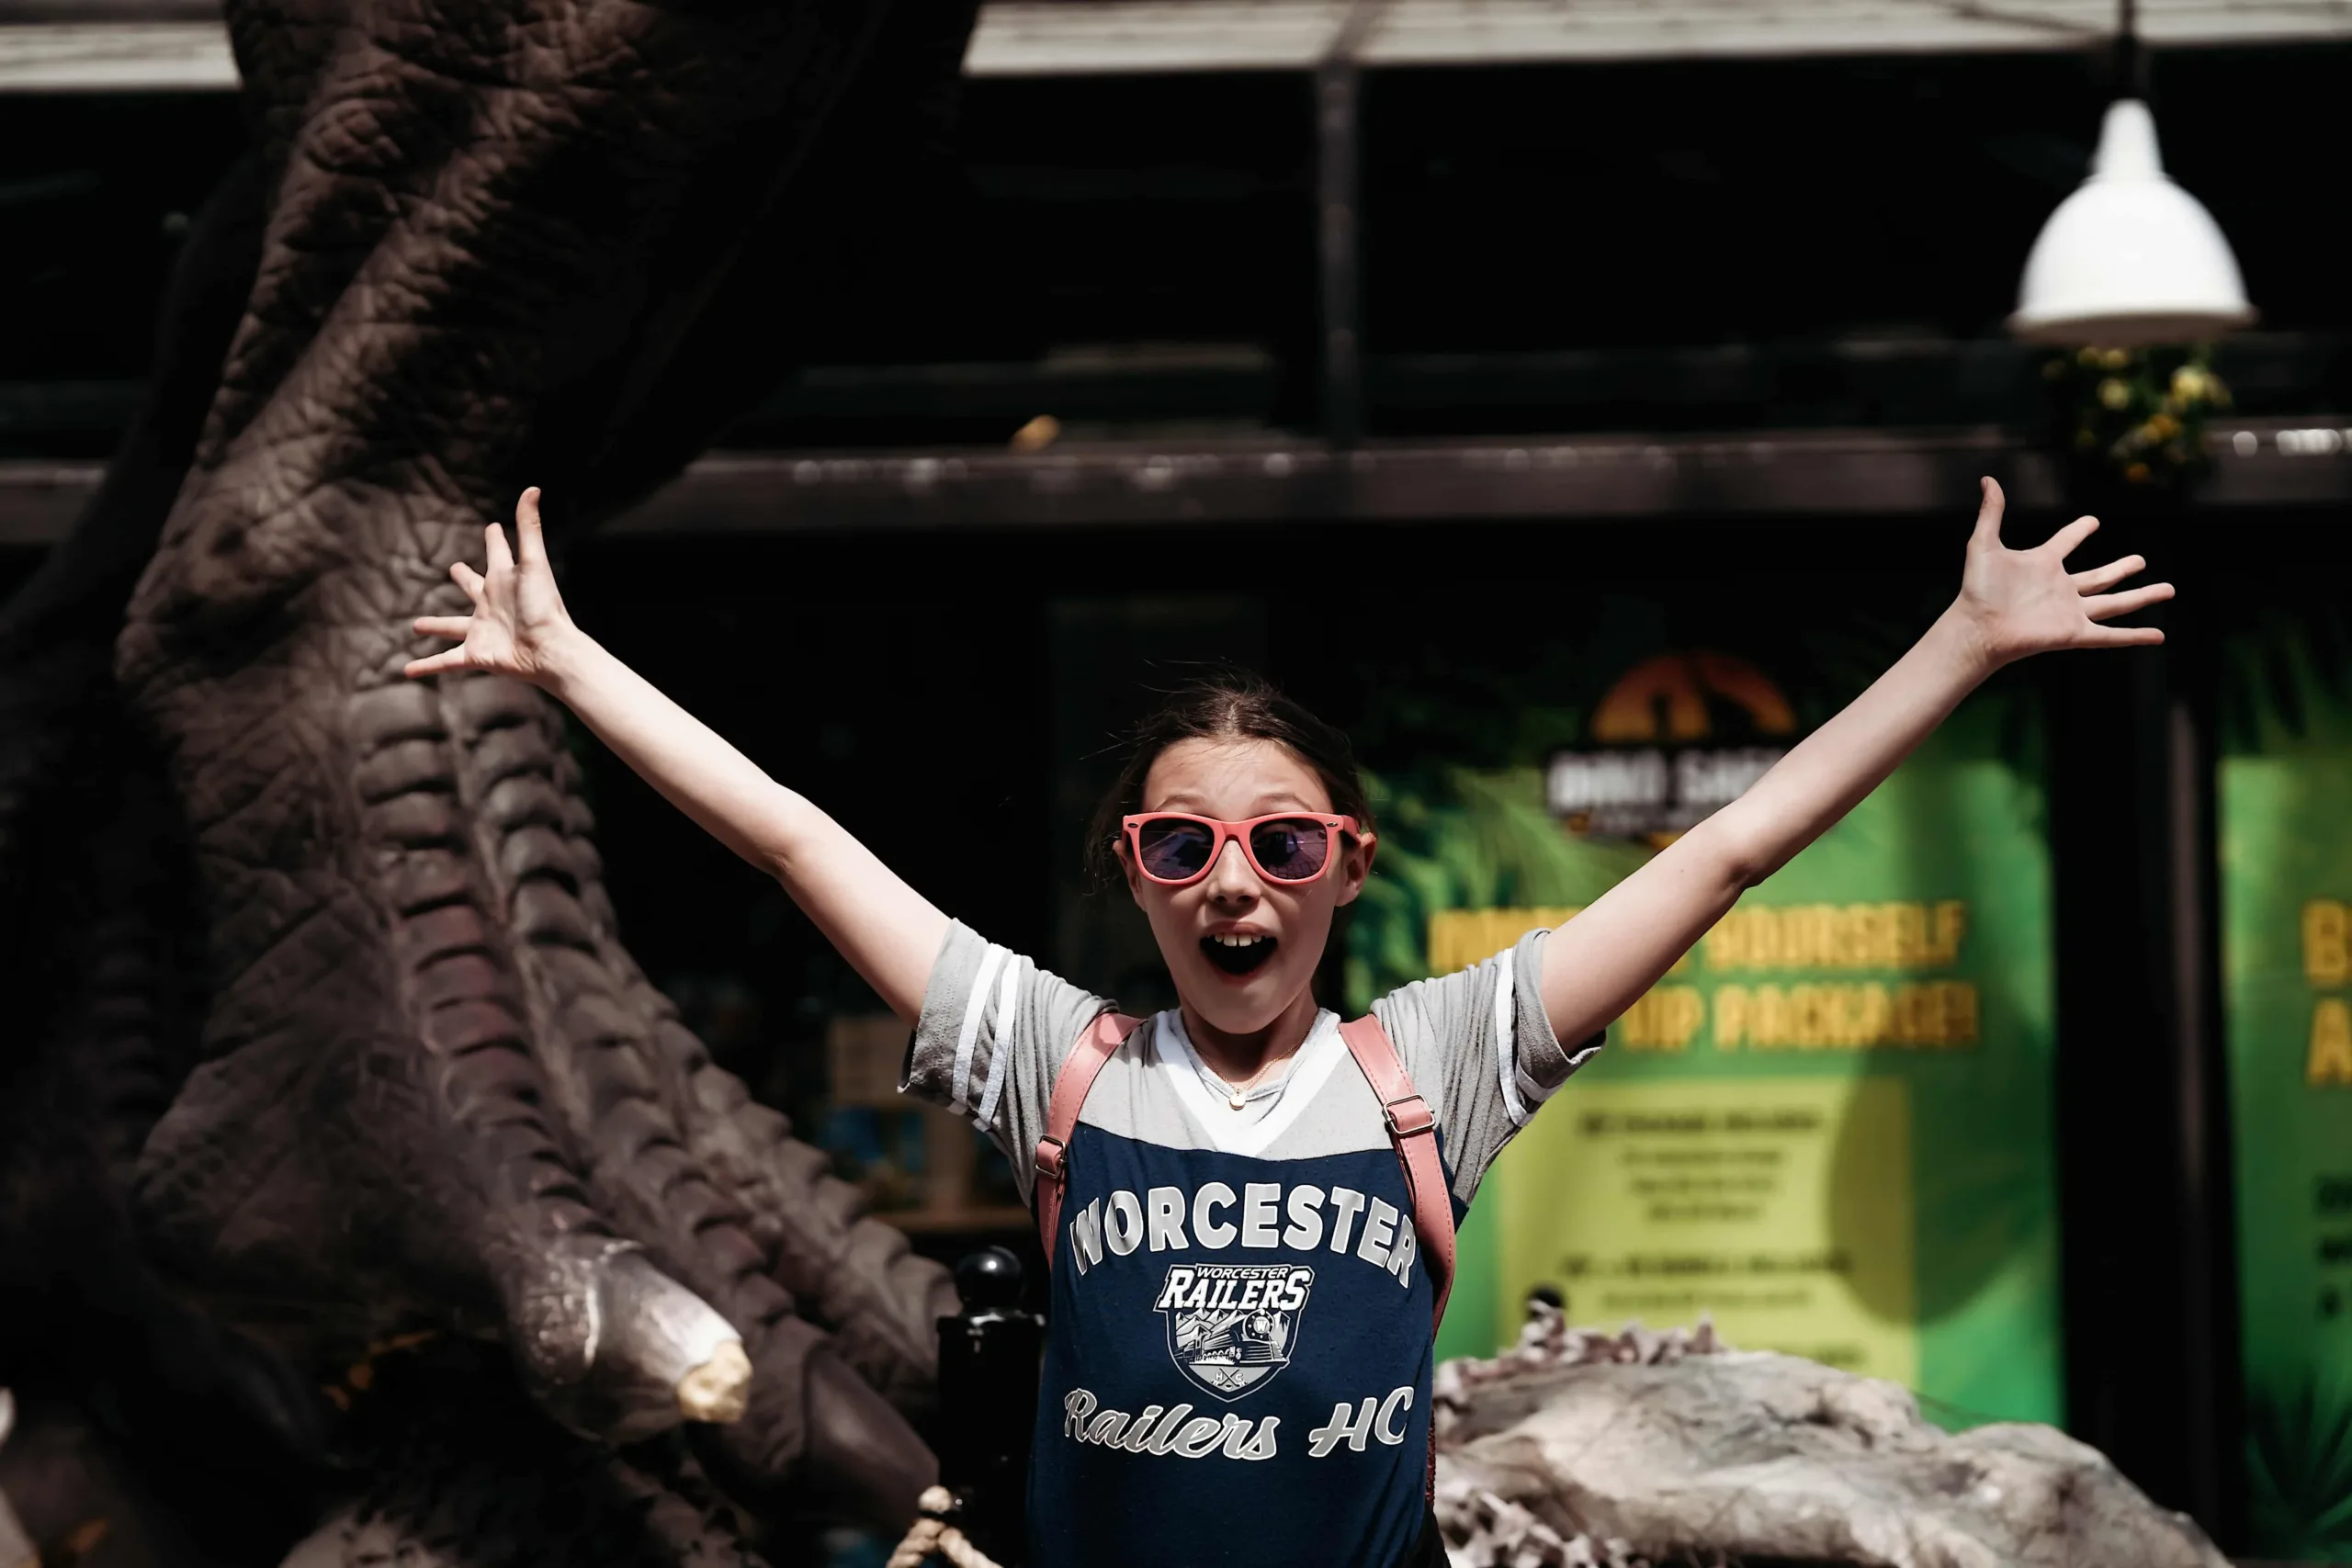 A delighted girl with arms raised in front of a dinosaur exhibit, capturing the spontaneous moments that make documentary family photography essential.